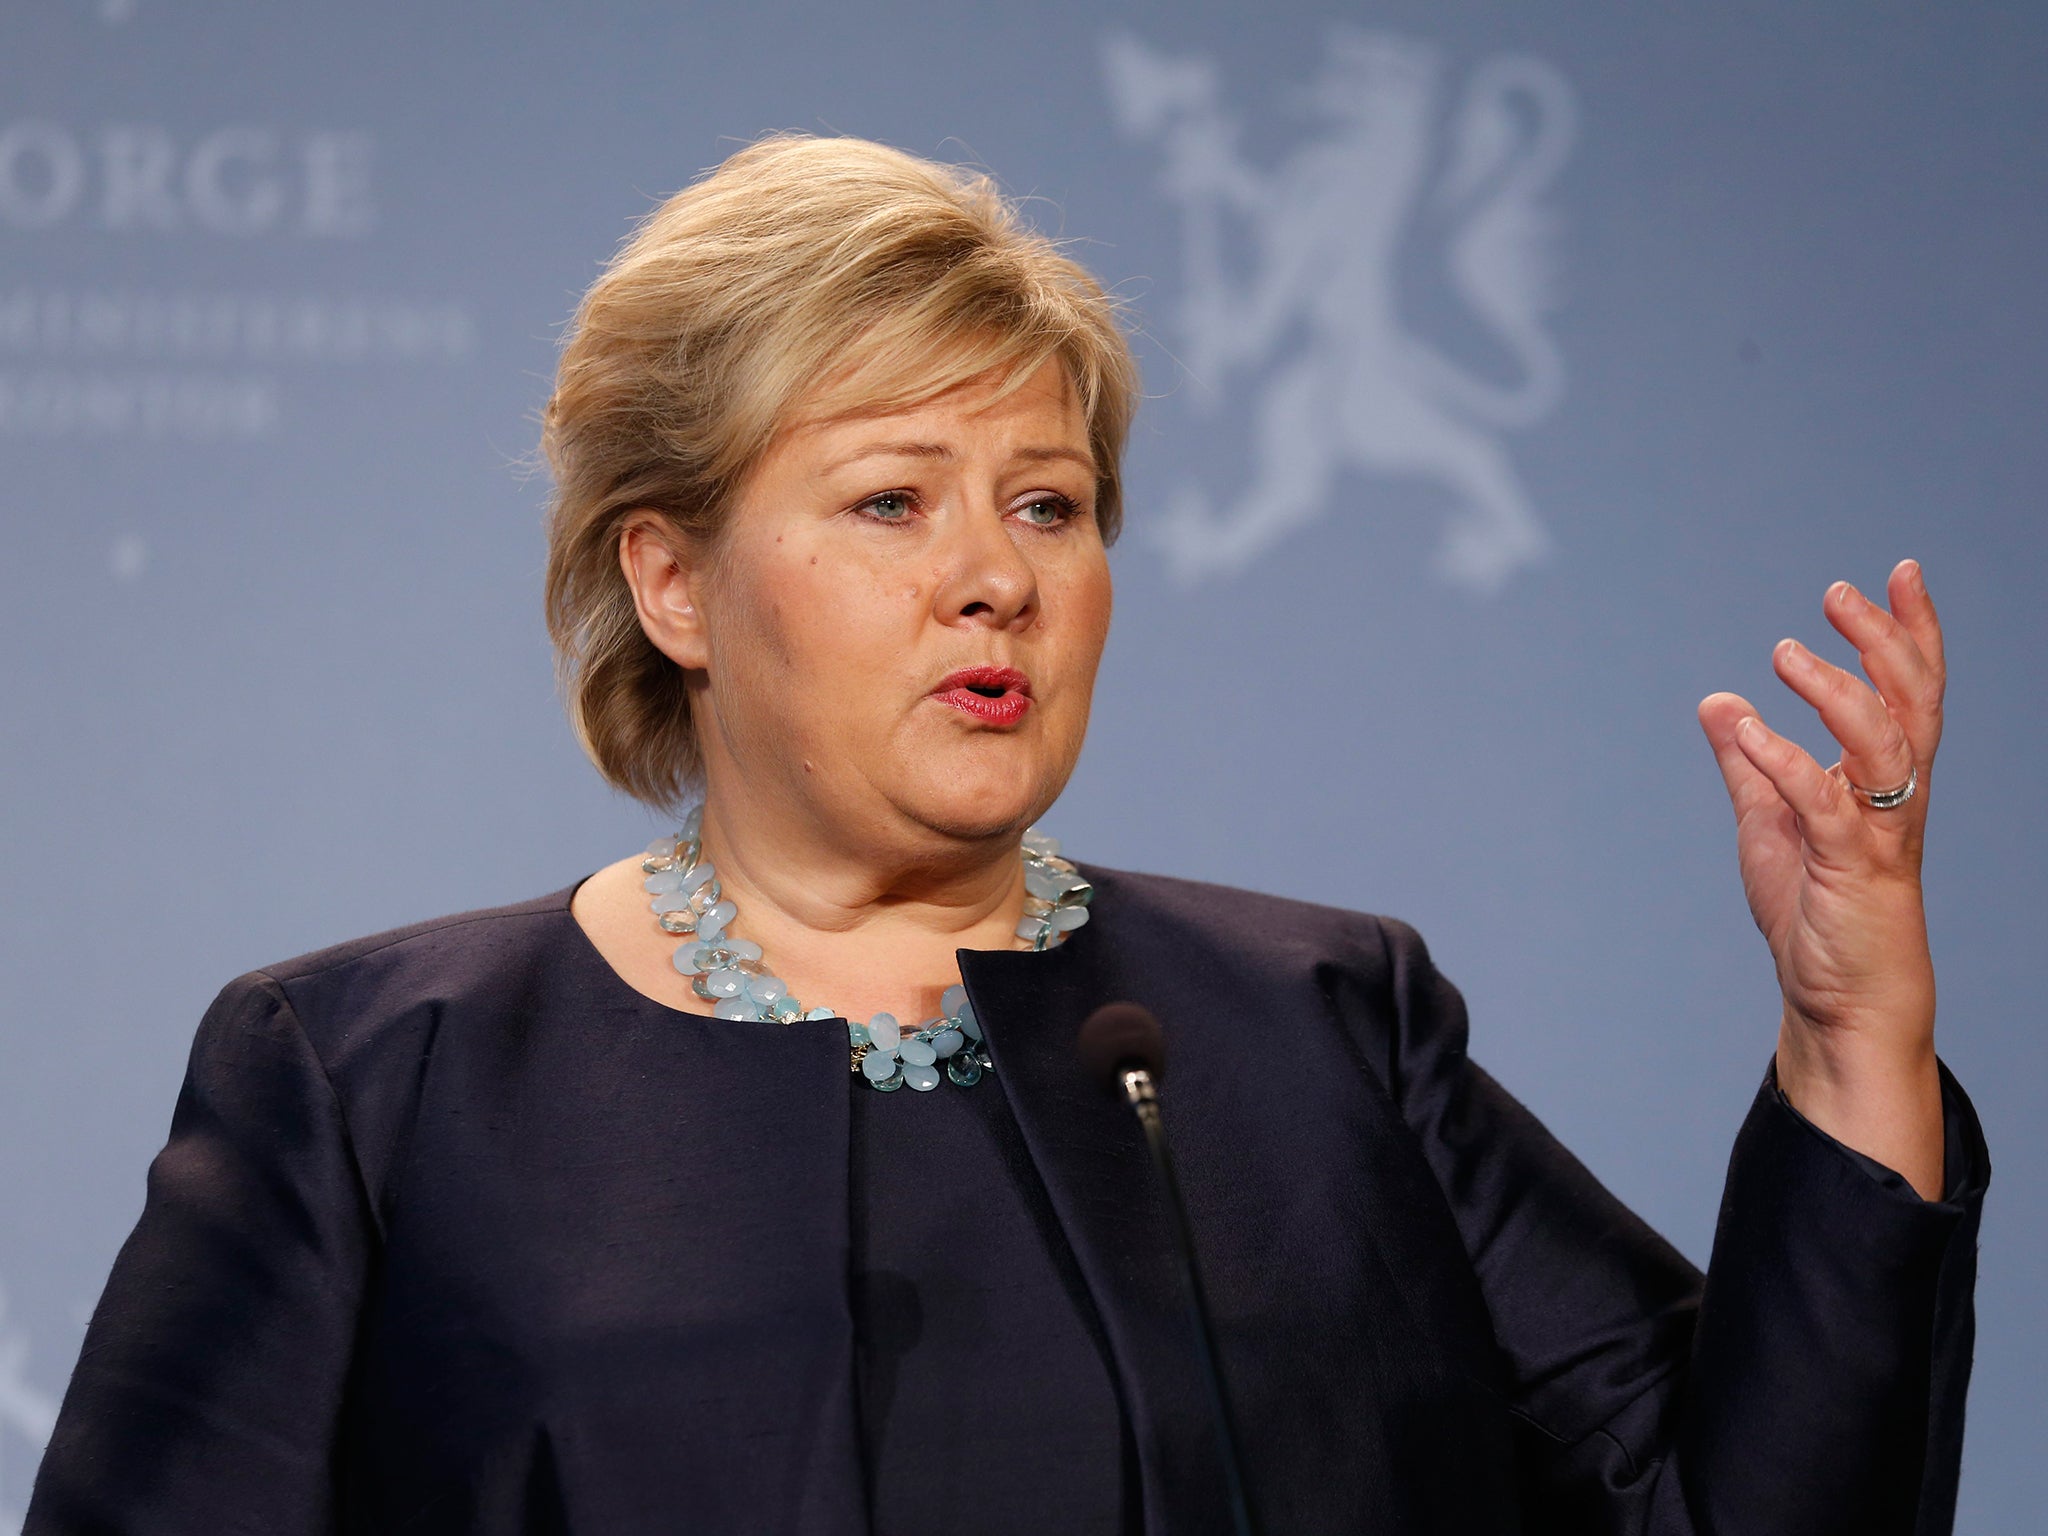 Norwegian Prime Minister Erna Solberg has called for a collective effort from across the EU to deal with the refugee crisis